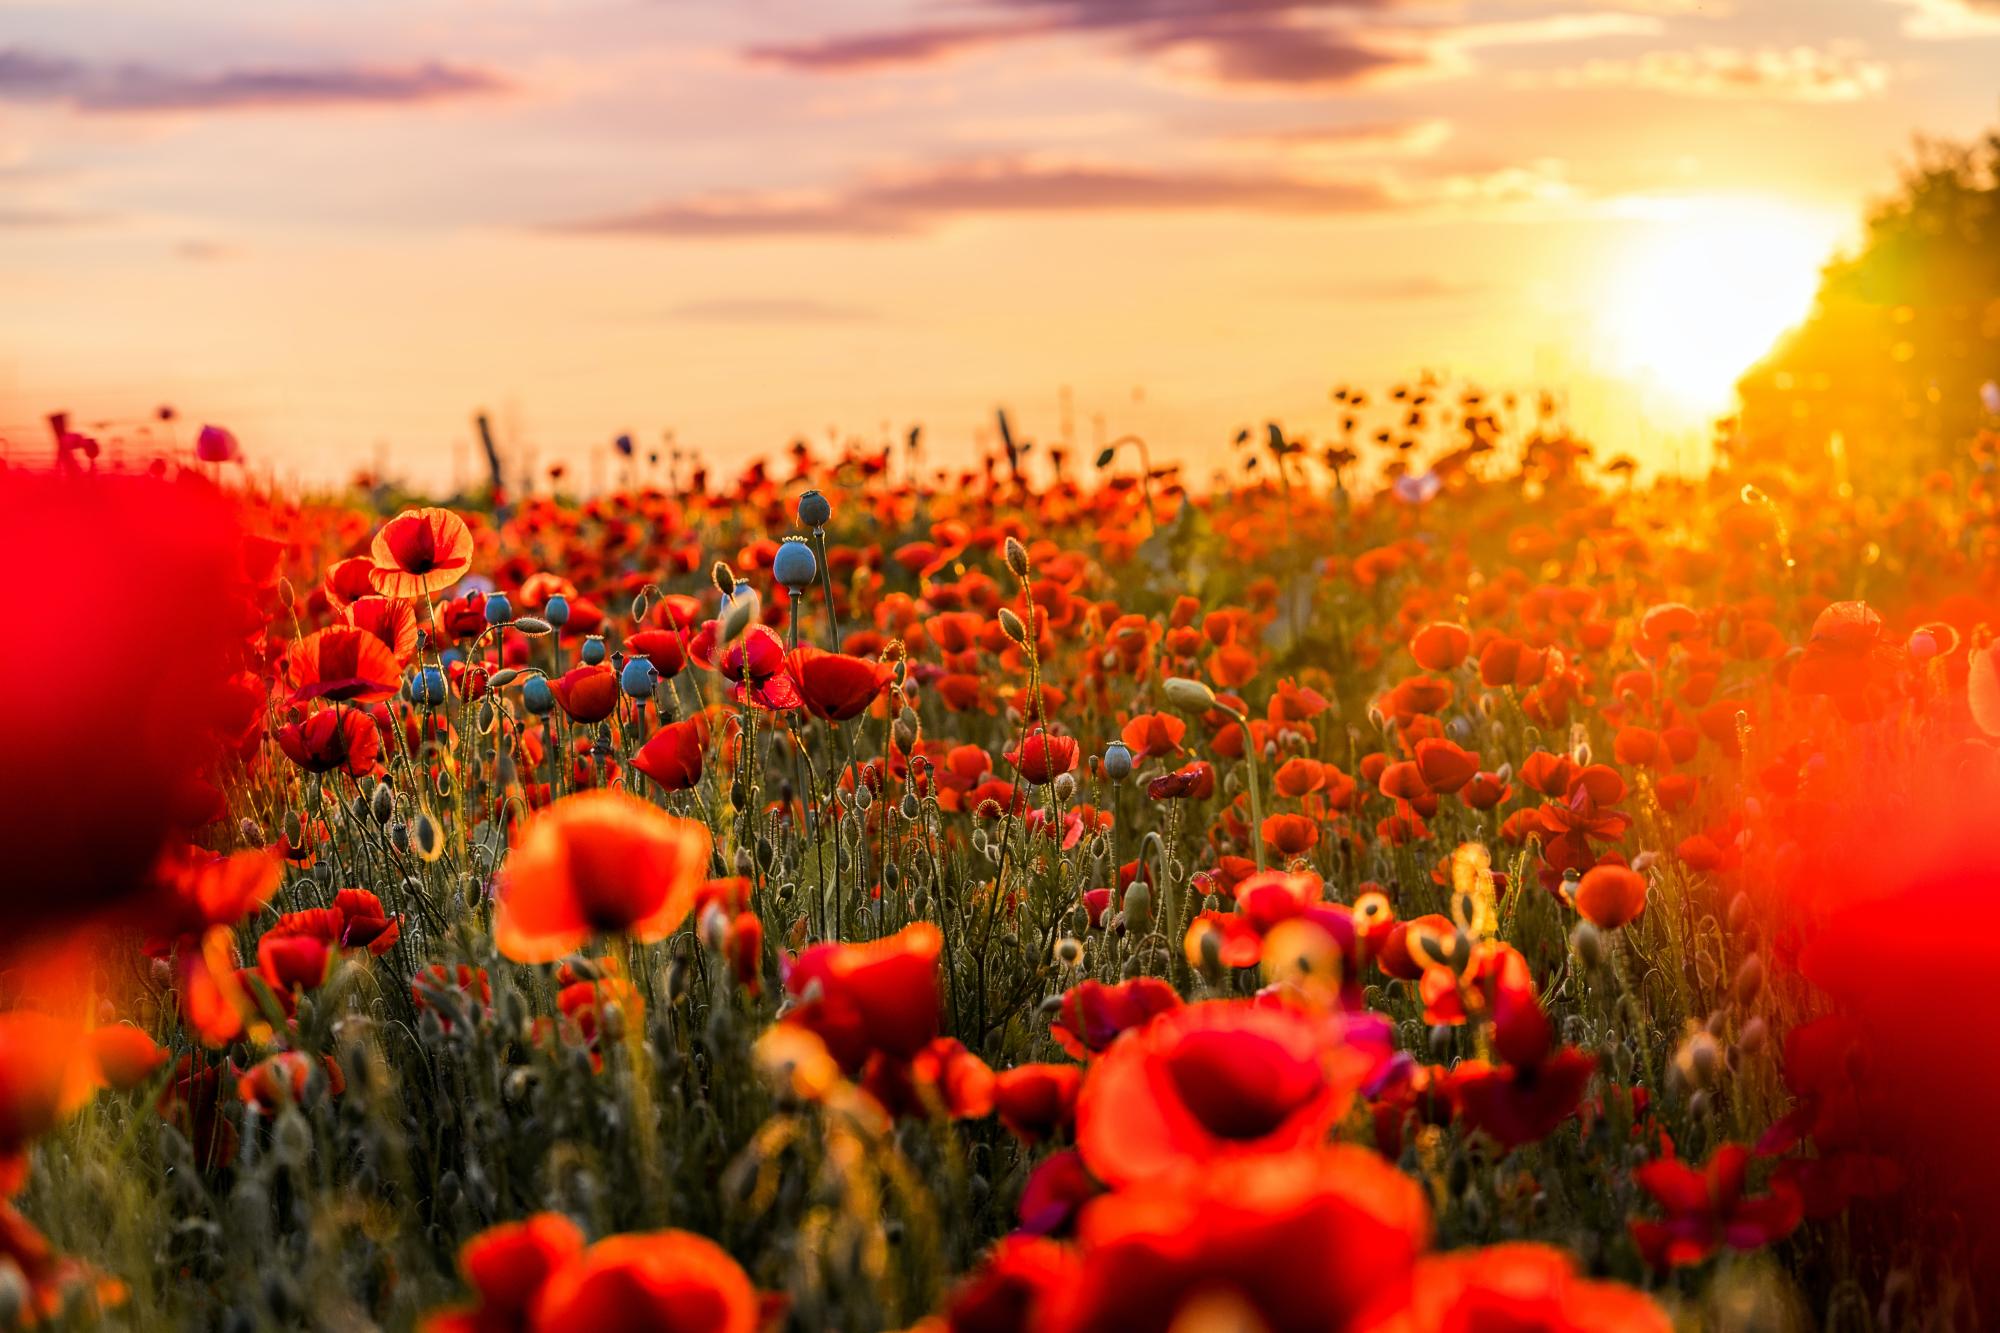 poppies in a field at sunset